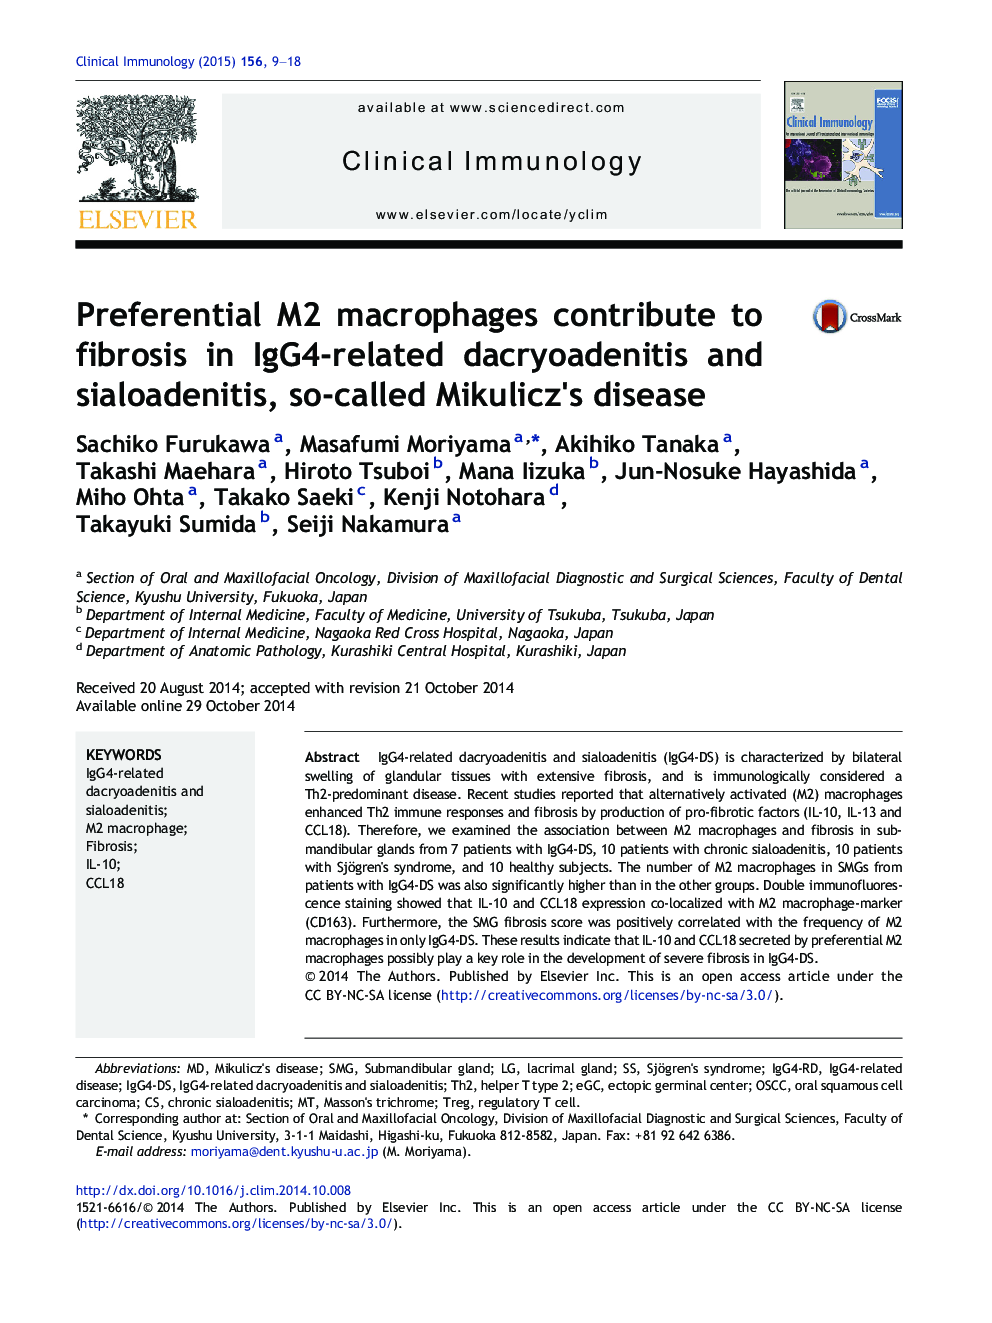 Preferential M2 macrophages contribute to fibrosis in IgG4-related dacryoadenitis and sialoadenitis, so-called Mikulicz's disease